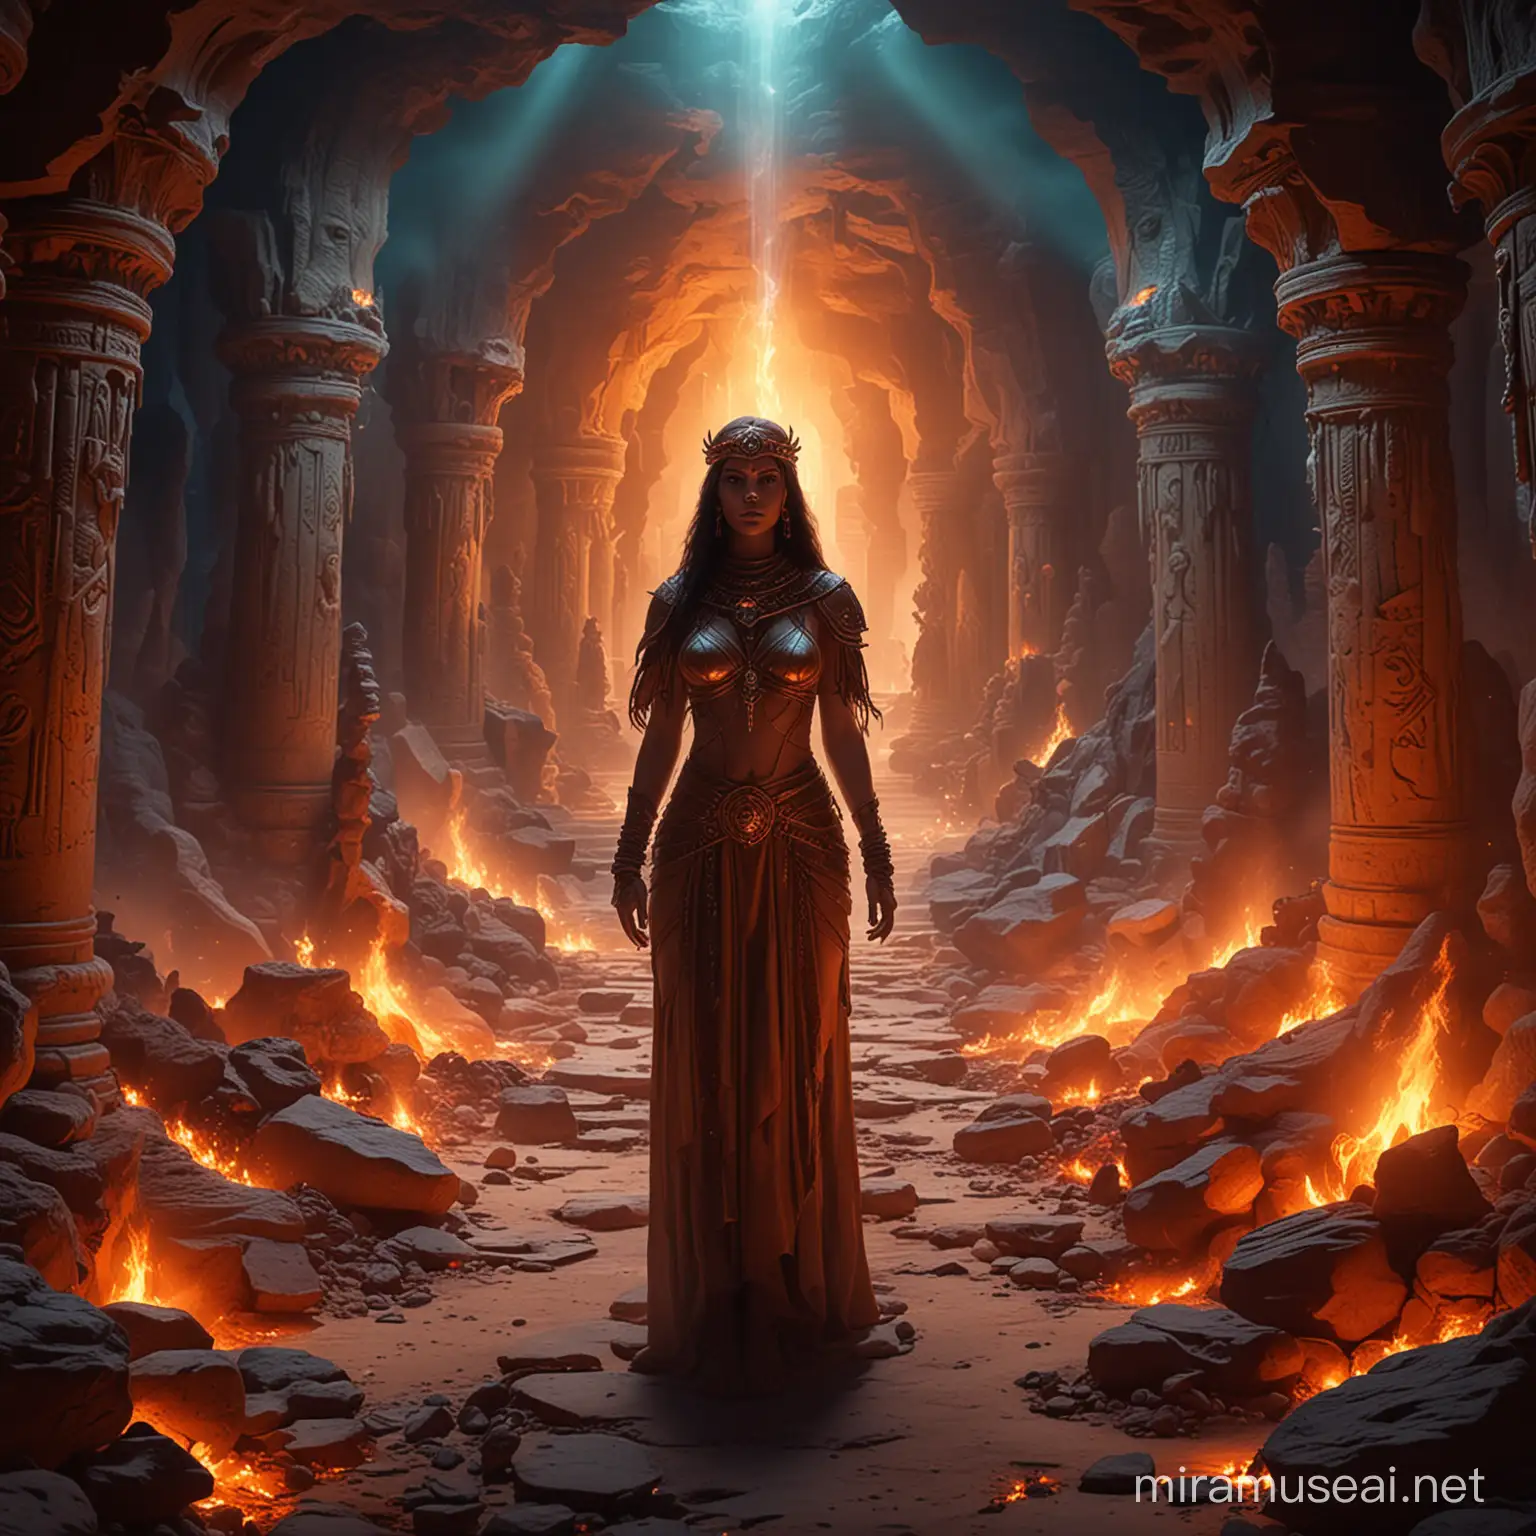 prophetess in dark oasis cavern temple, surrounded by evil spirits, colorful, hell fire, mystical magical realms 